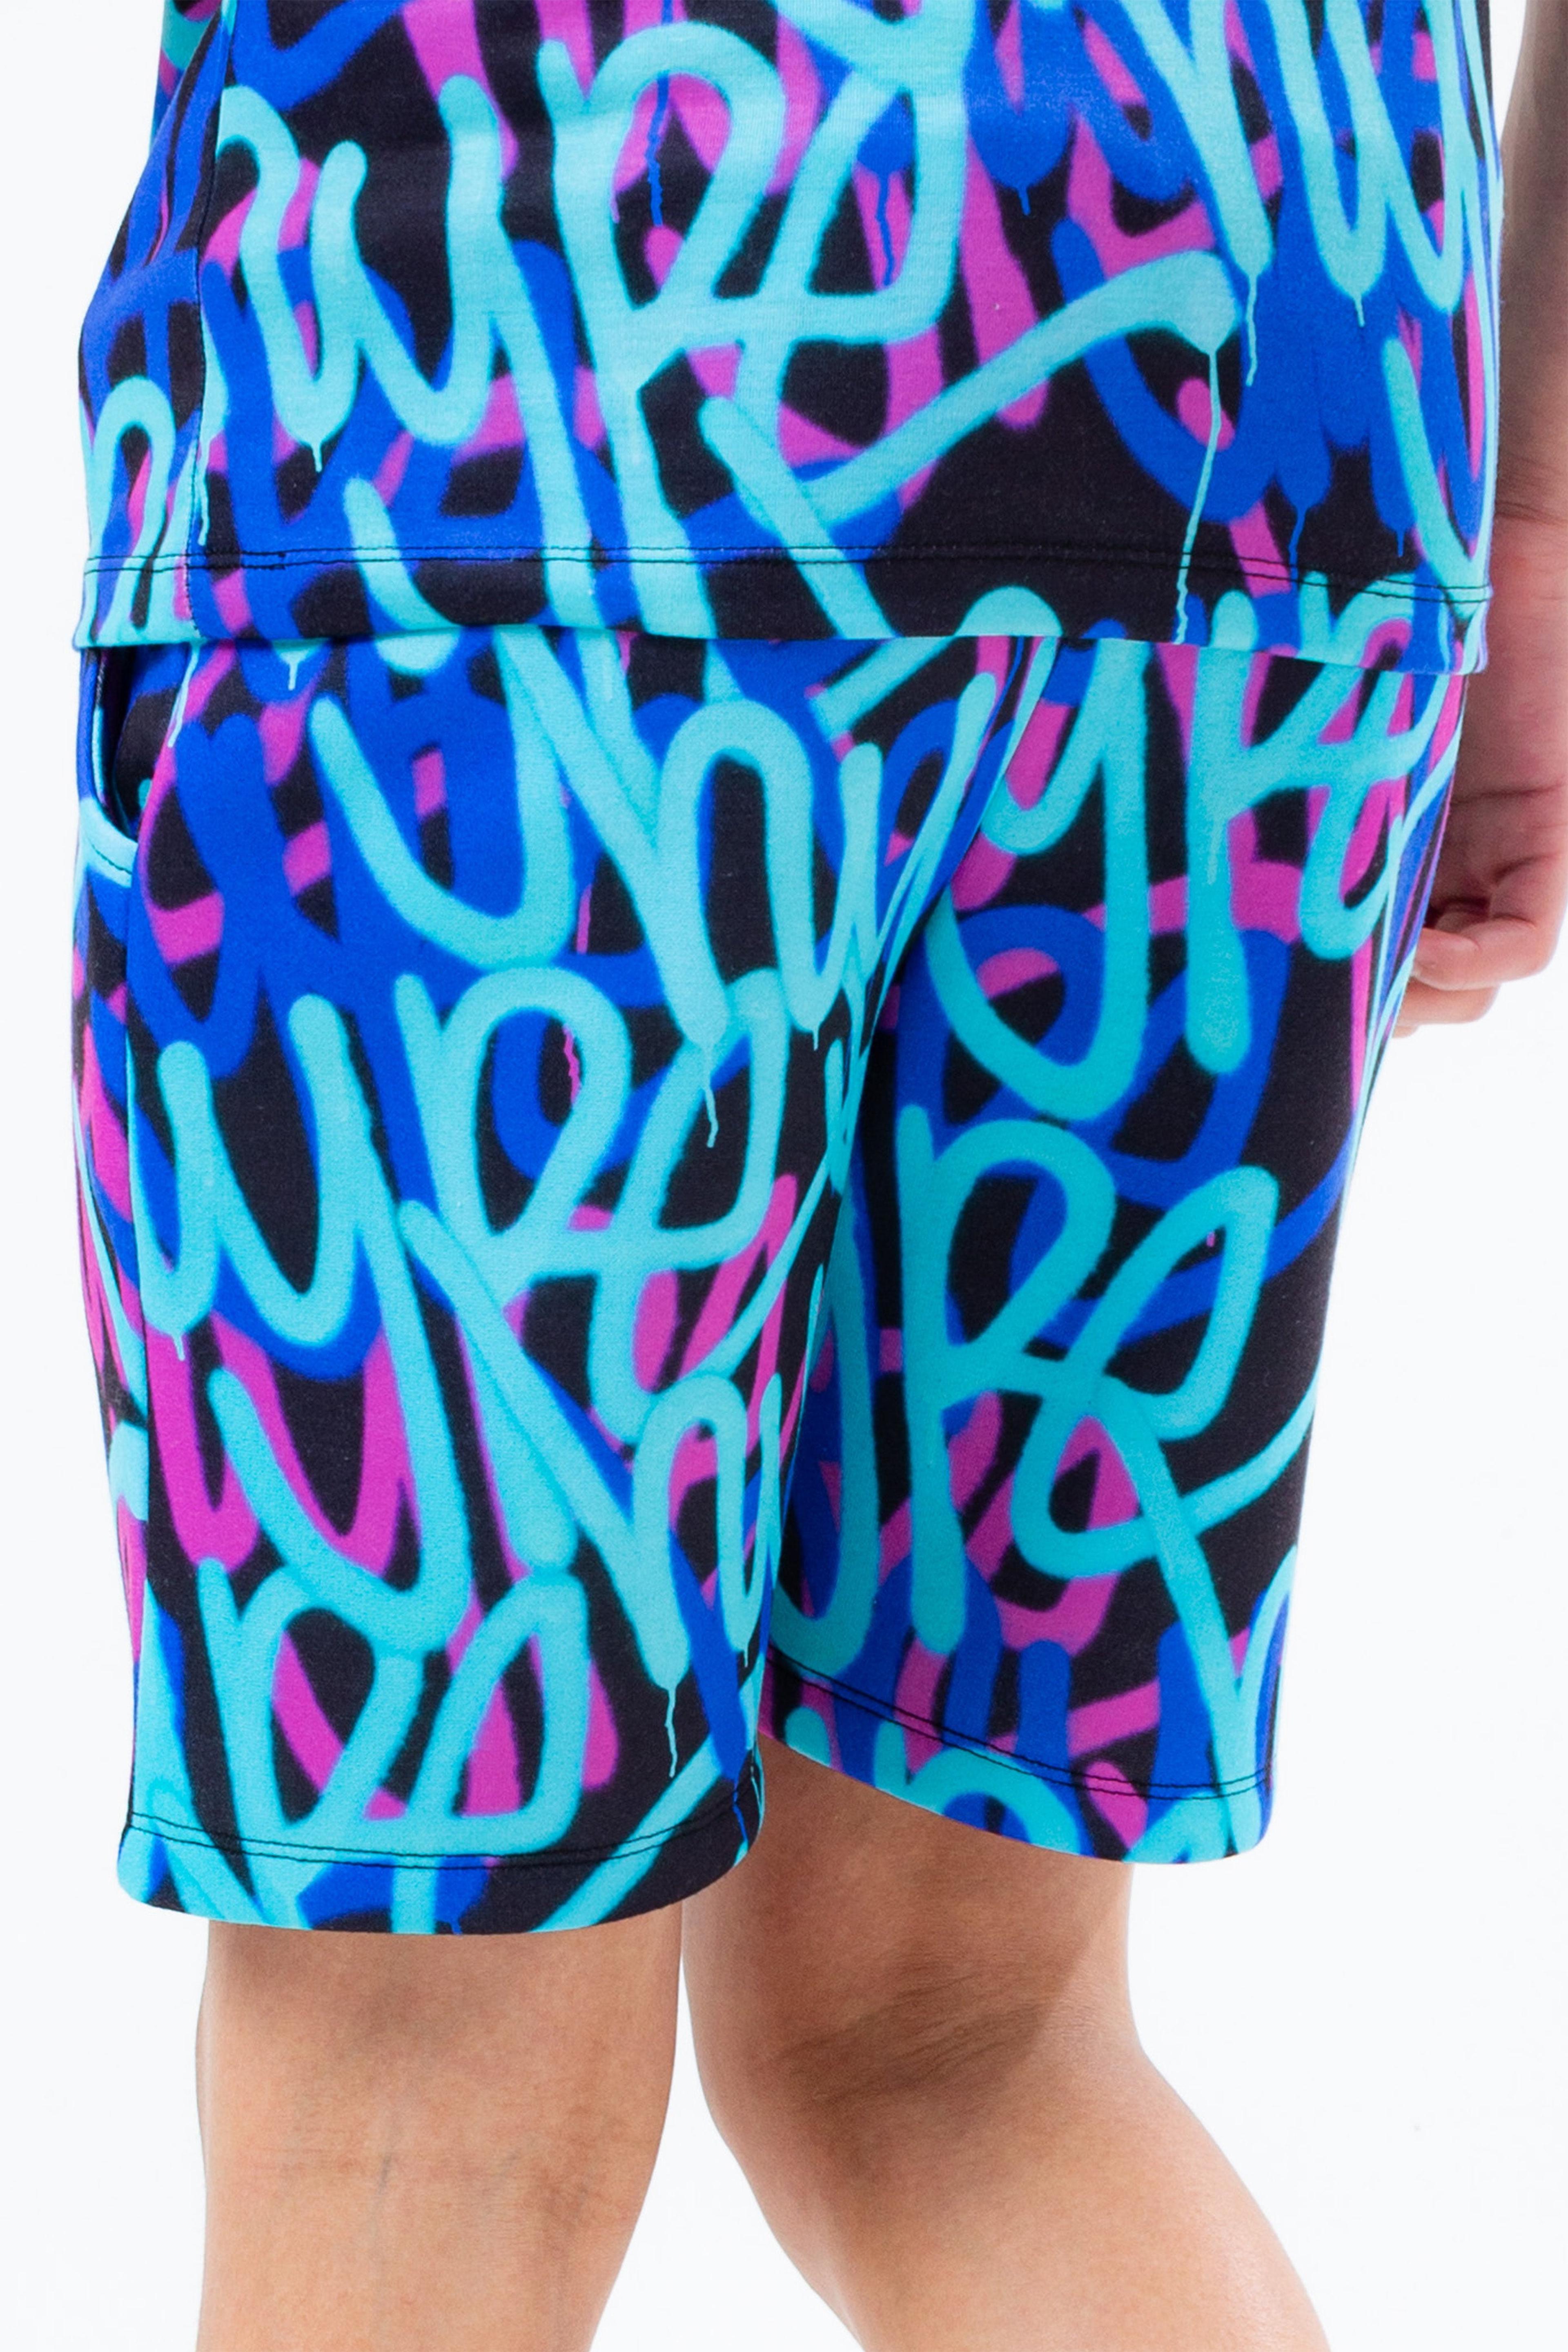 Alternate View 1 of HYPE MIDNIGHT TAG BOYS SHORTS